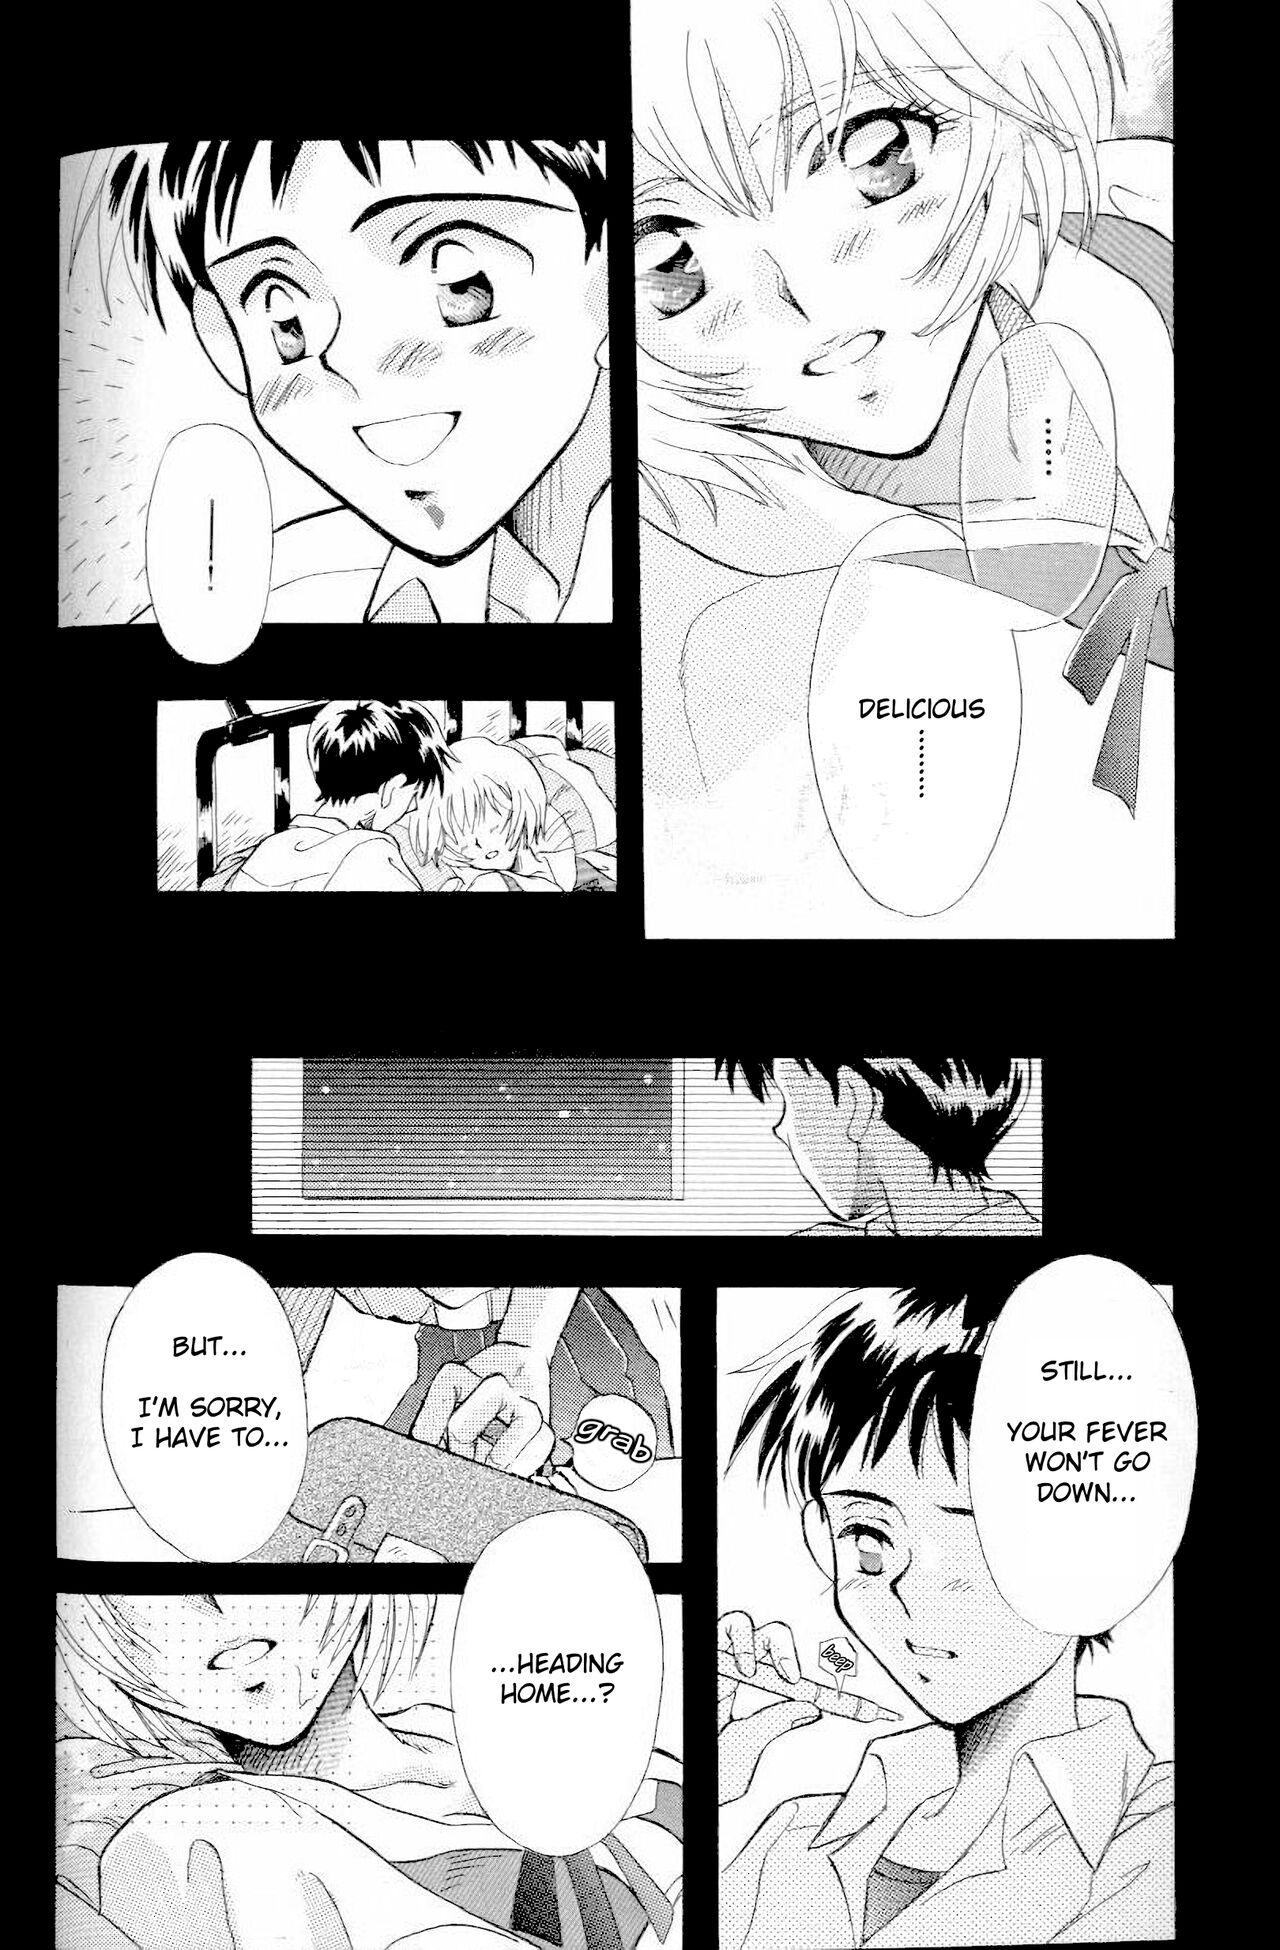 Gordinha How To Fly In The Sky - Please Be True Episode 0:1 - Neon genesis evangelion Gayemo - Page 10